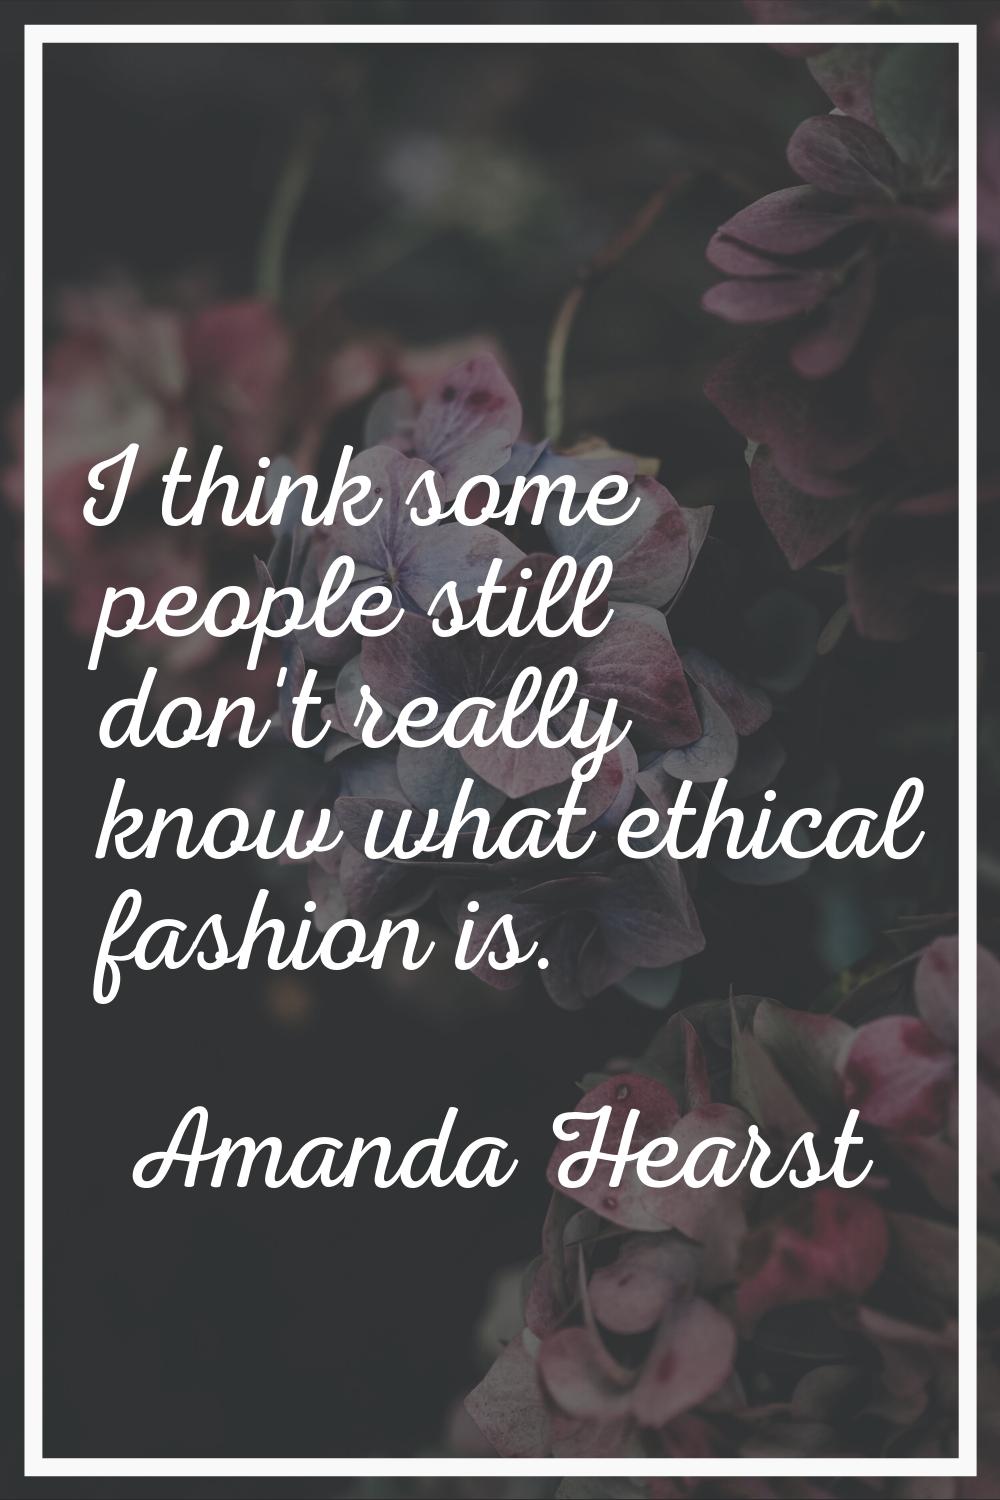 I think some people still don't really know what ethical fashion is.